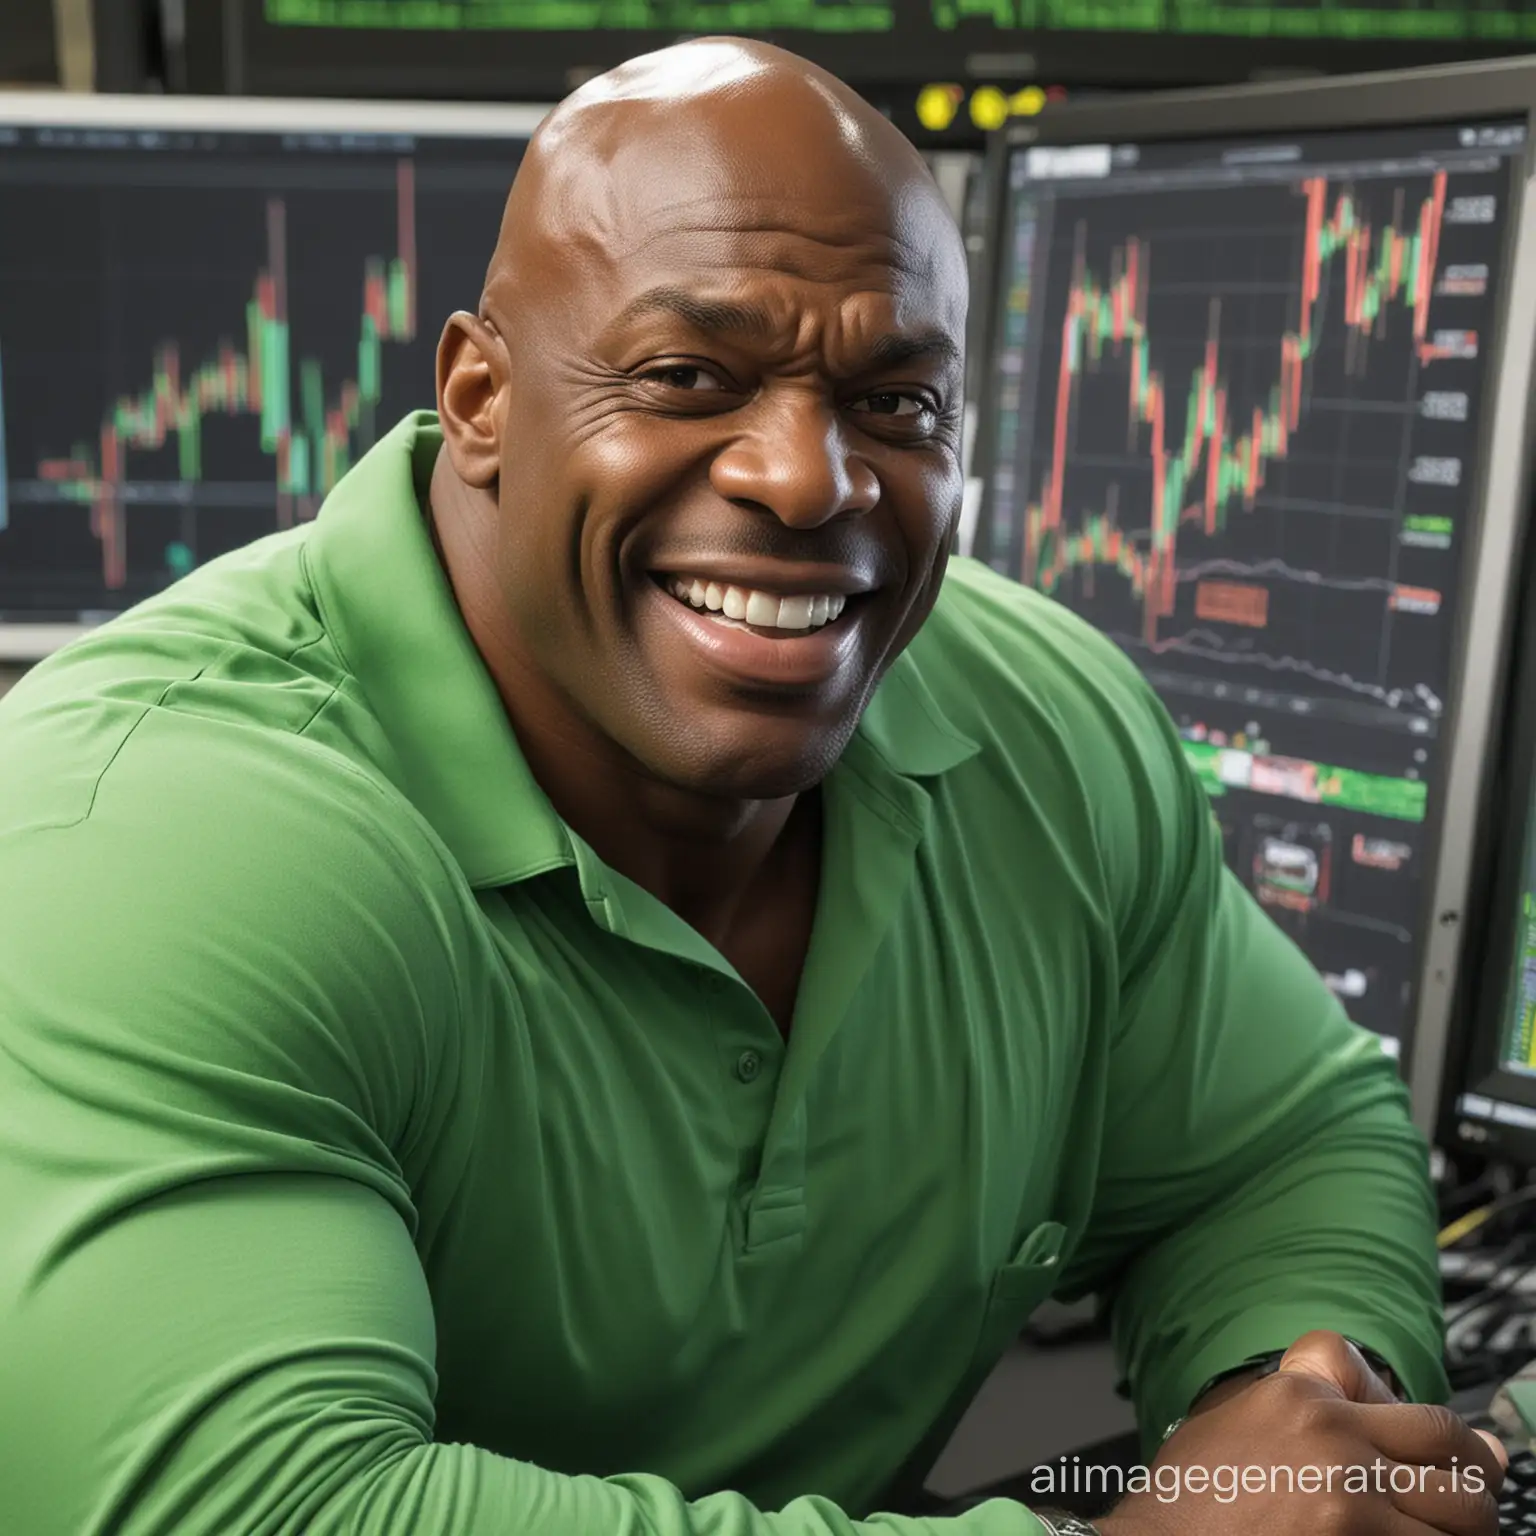 Ronnie Coleman sat at a computer trading, green positive trading chart, extreme happy expression